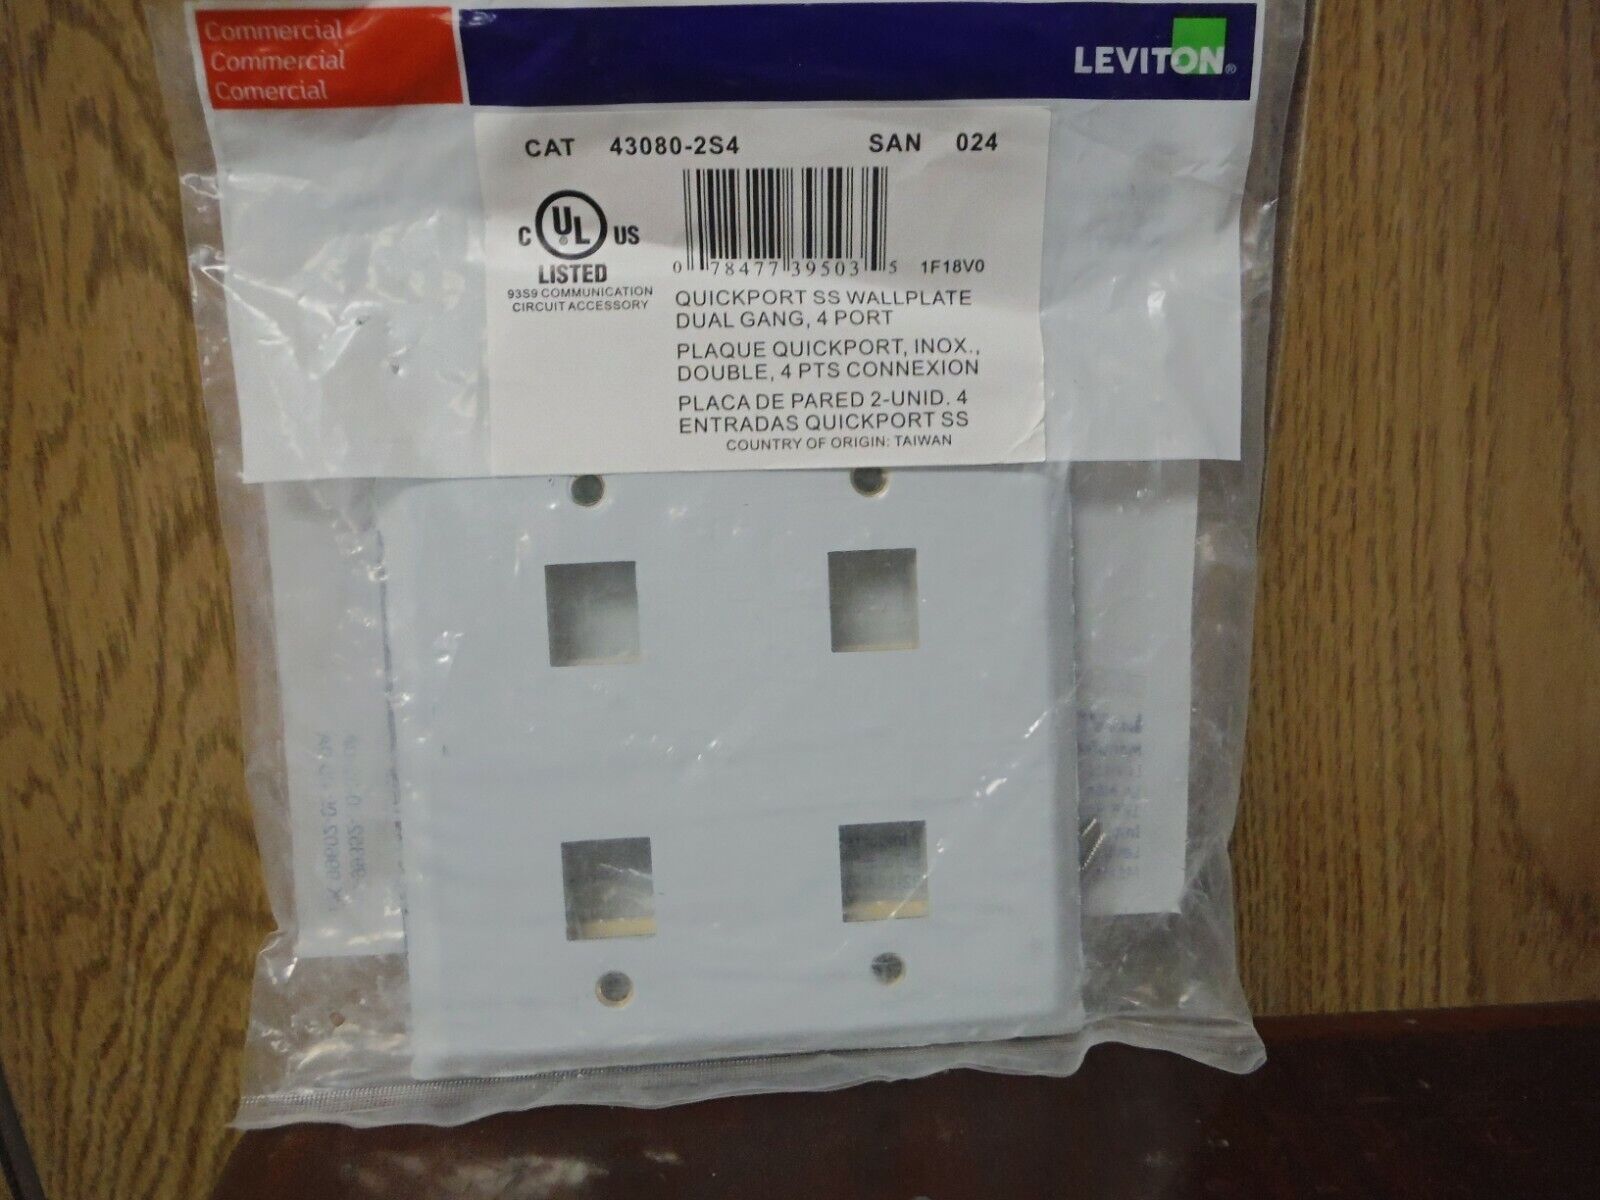 Leviton 43080-2S4 QuickPort Wallplate Double Gang 4-Port Stainless Steel